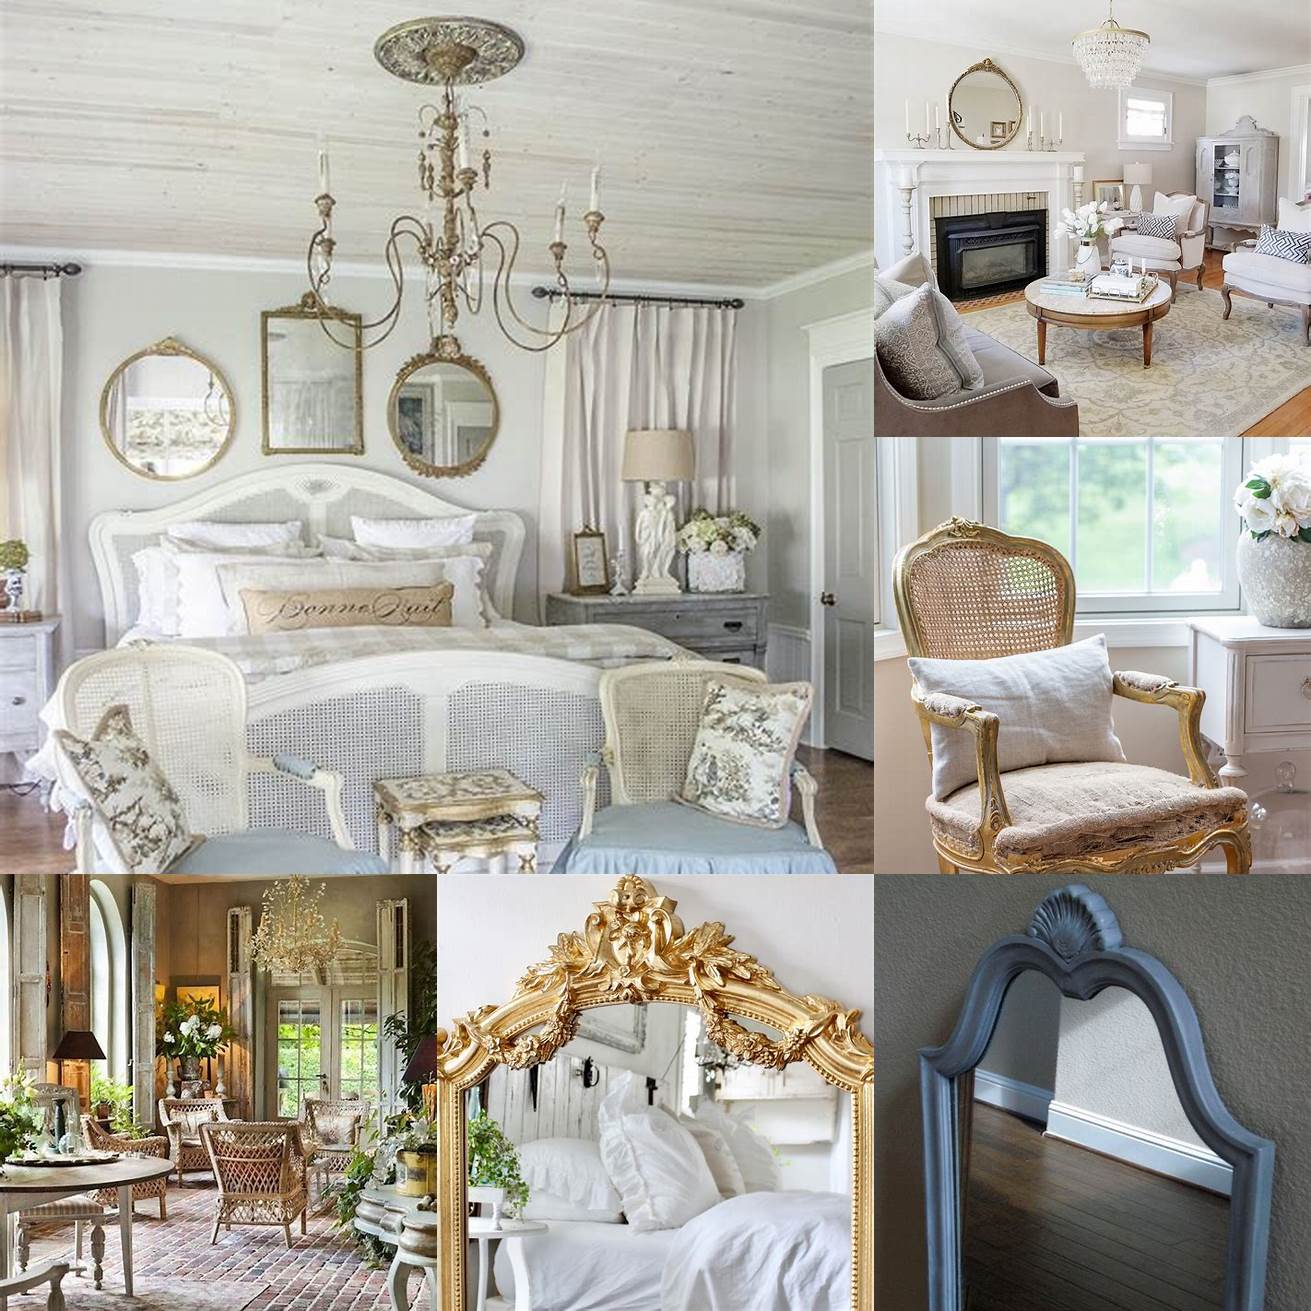 Use French Provincial accent pieces such as mirrors or lamps to add a pop of elegance to any room